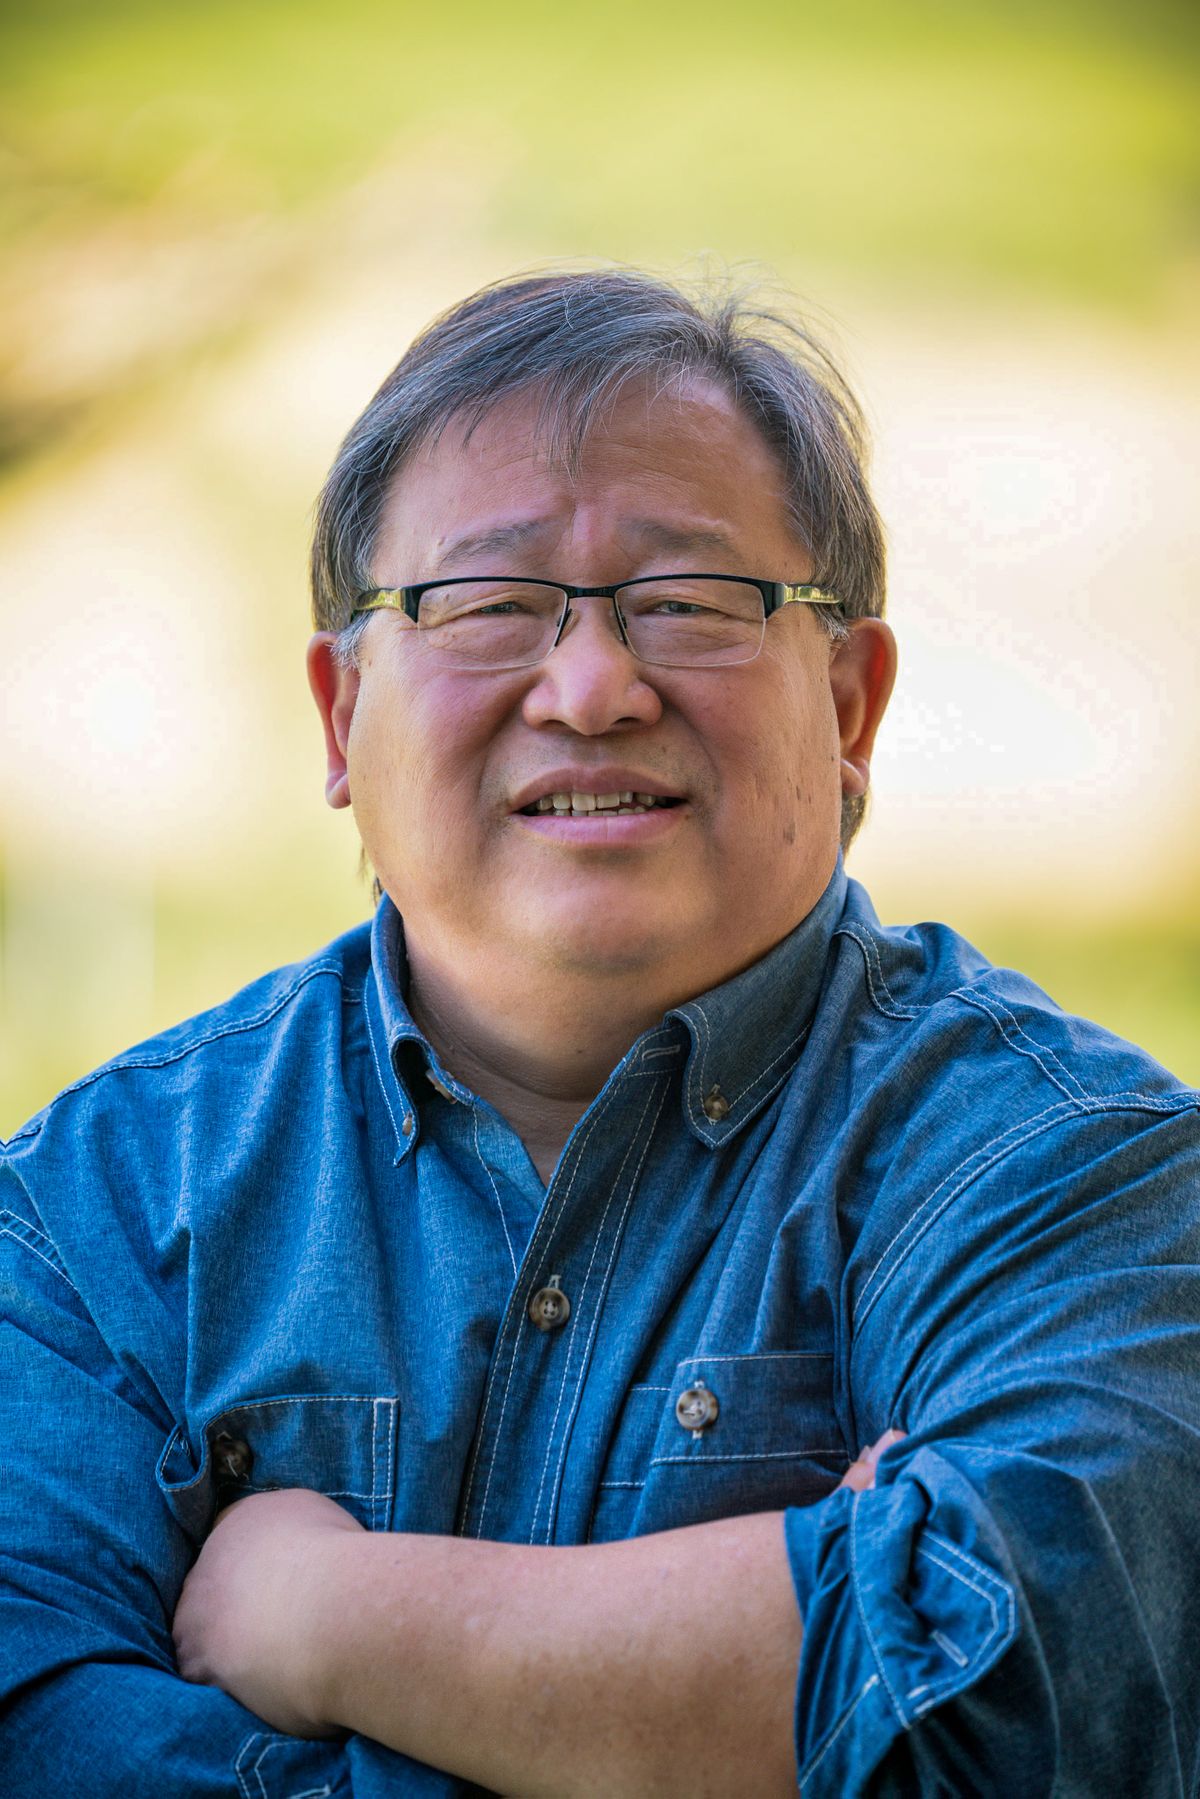 Cal Mukumoto tapped to become next State Forester